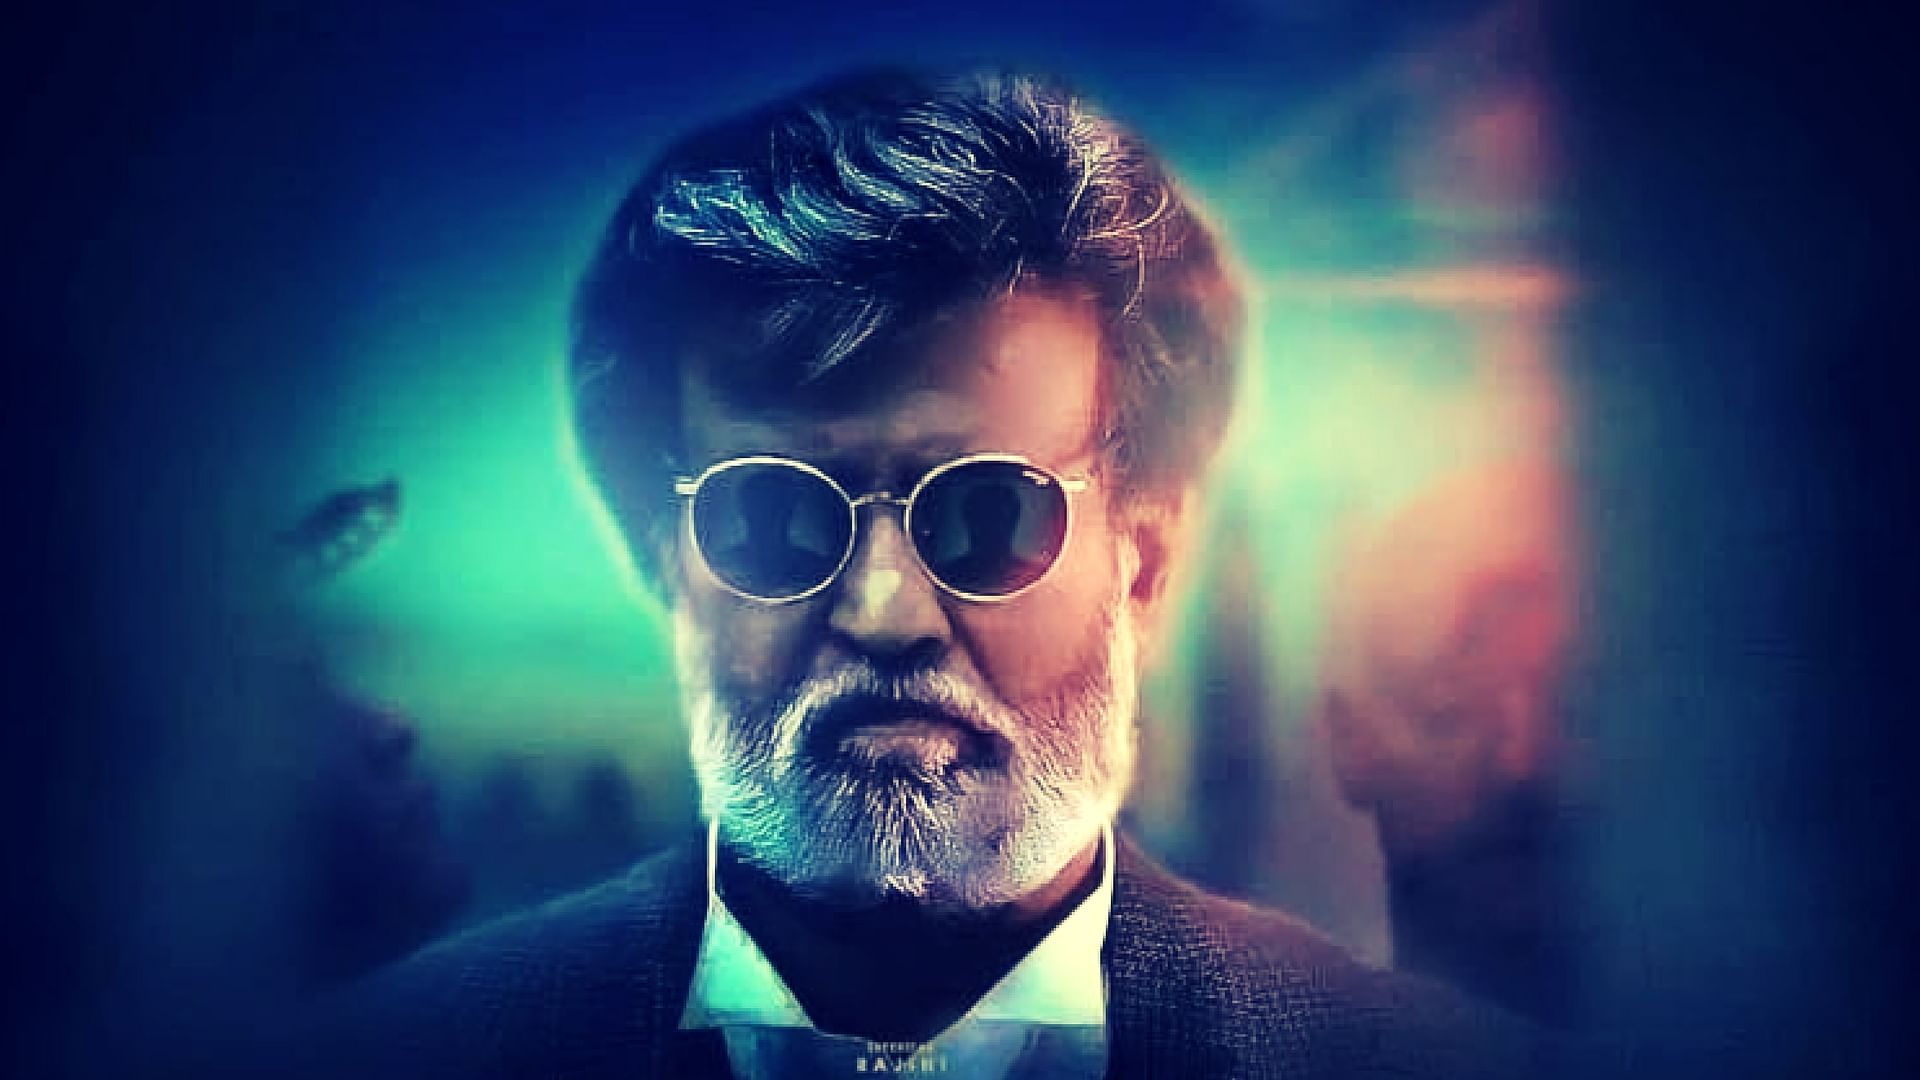 Kabali' Day 1 Collections Have Crossed the Rs 100 Crore Mark